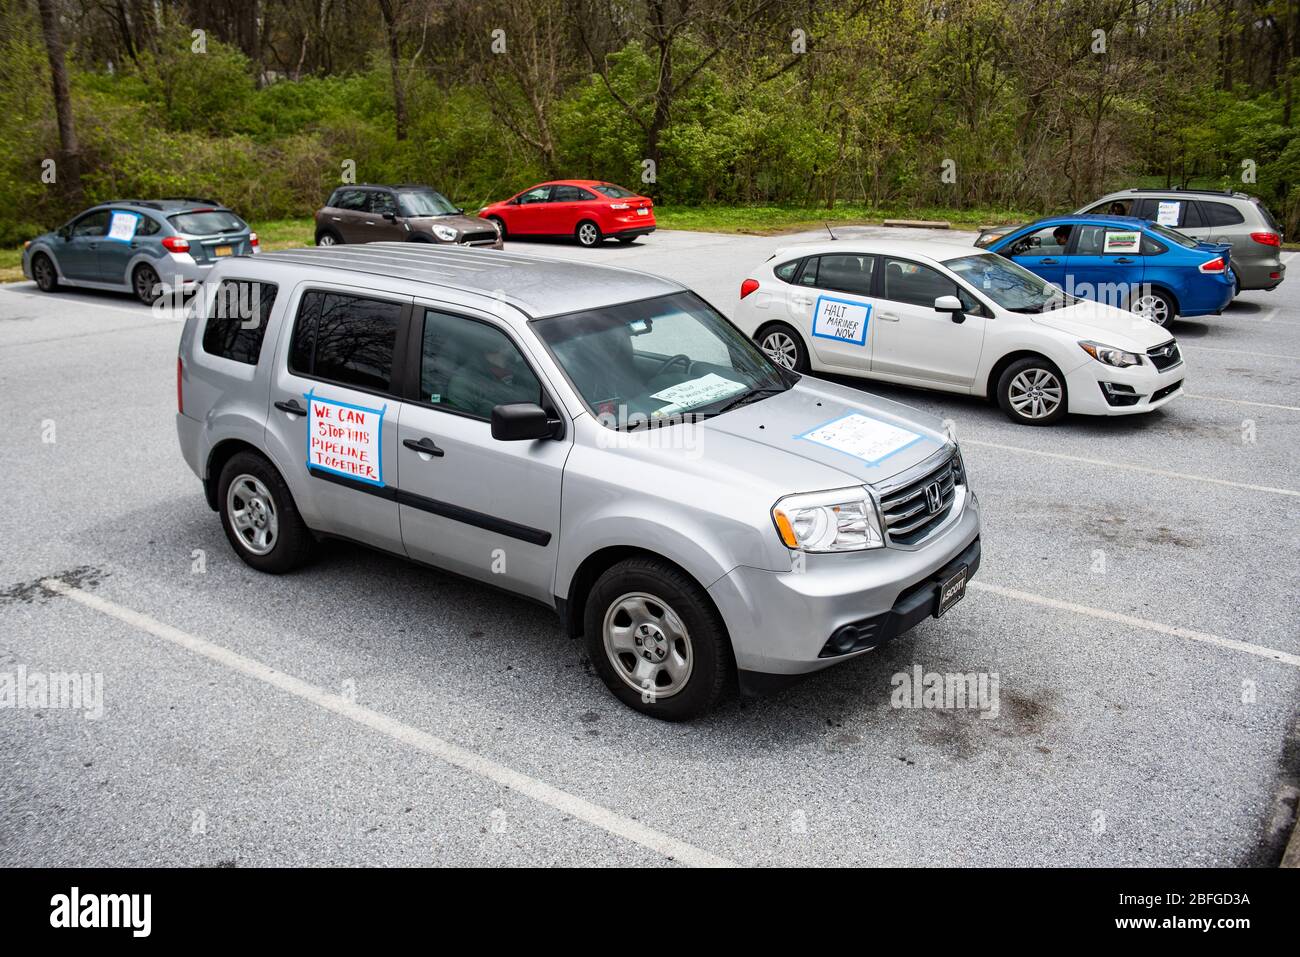 Exton, Pennsylvania. About two dozen vehicles joined a caravan protest in Exton PA bringing focus to state waivers issued to Sunoco's Mariner East pipeline project during the height of the Coronavirus pandemic. April 18, 2020.  Credit: Christopher Evens/Alamy Live News Stock Photo